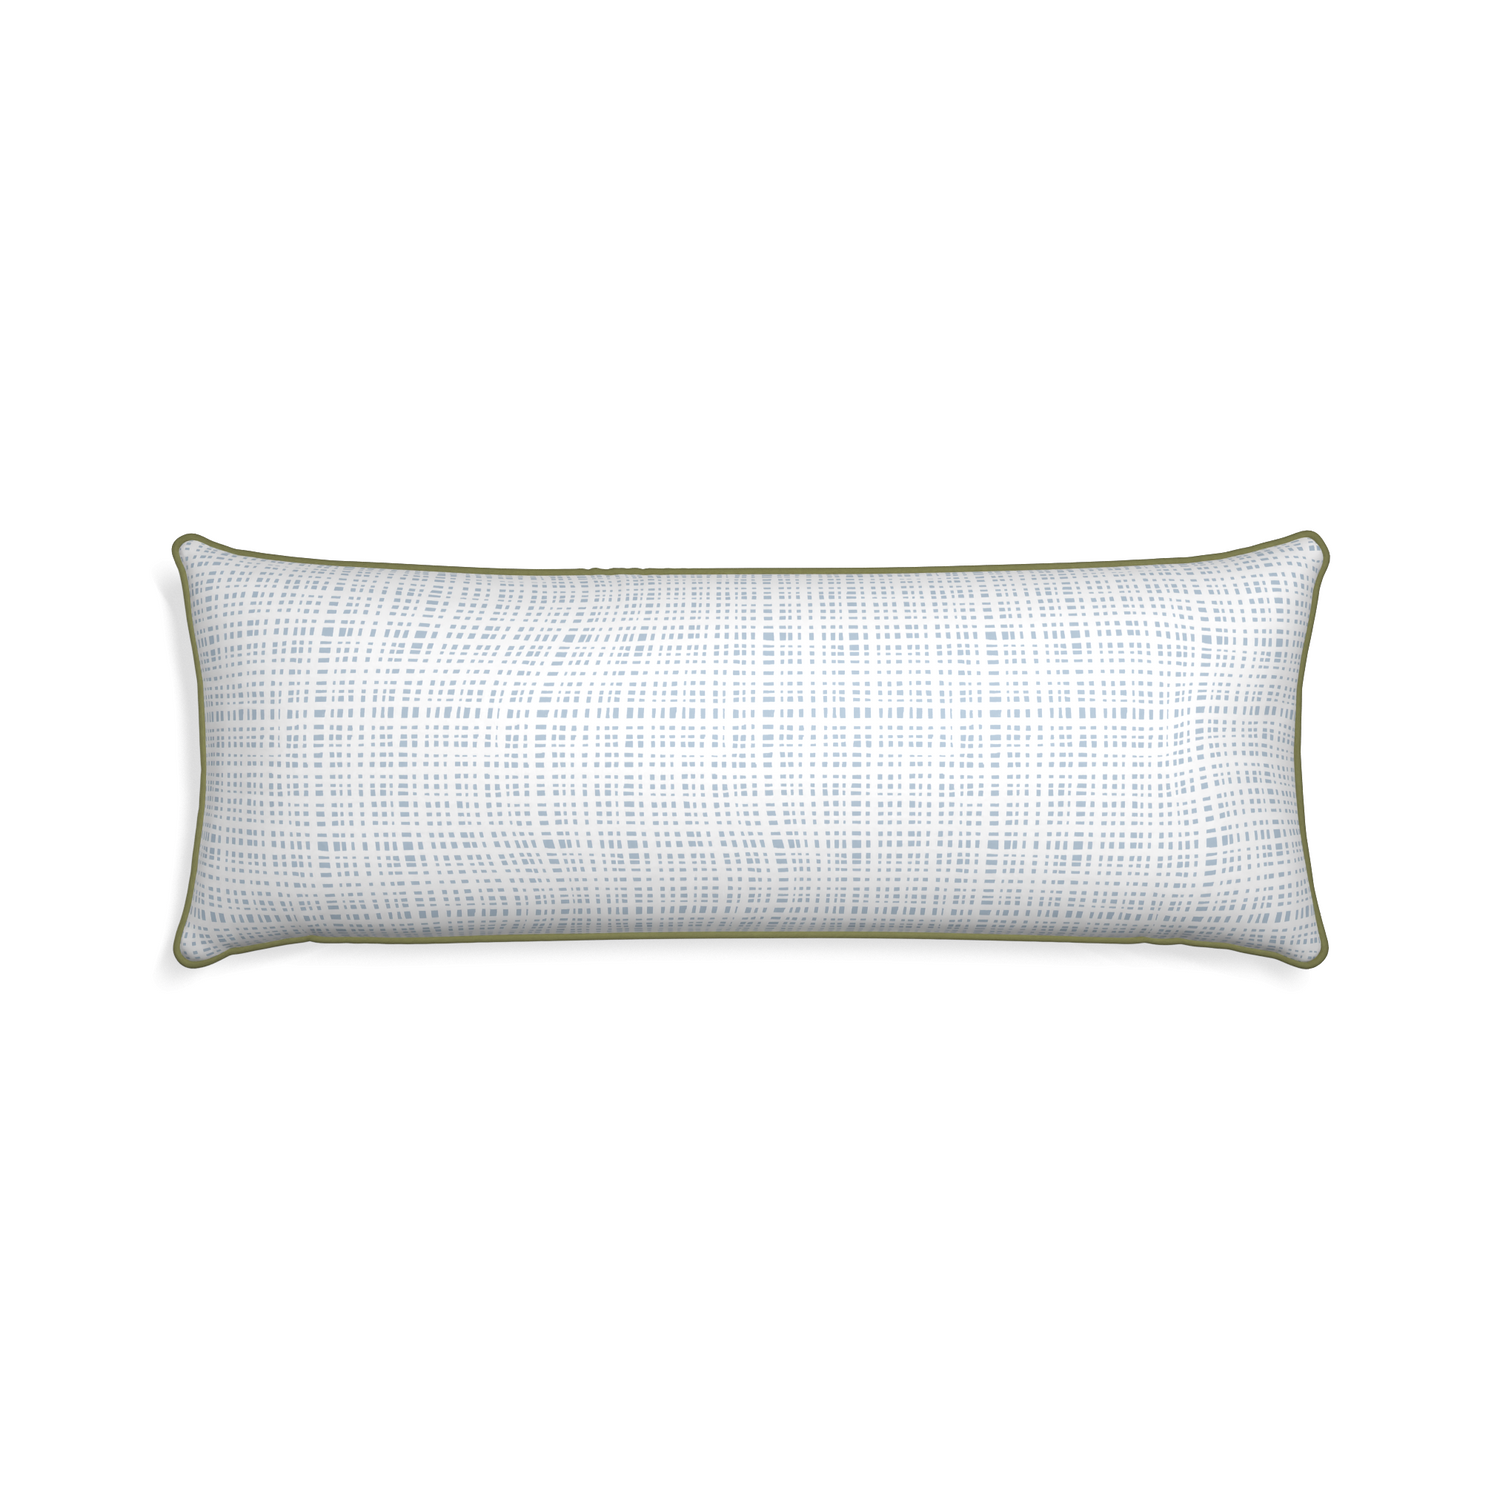 Xl-lumbar ginger sky custom pillow with moss piping on white background